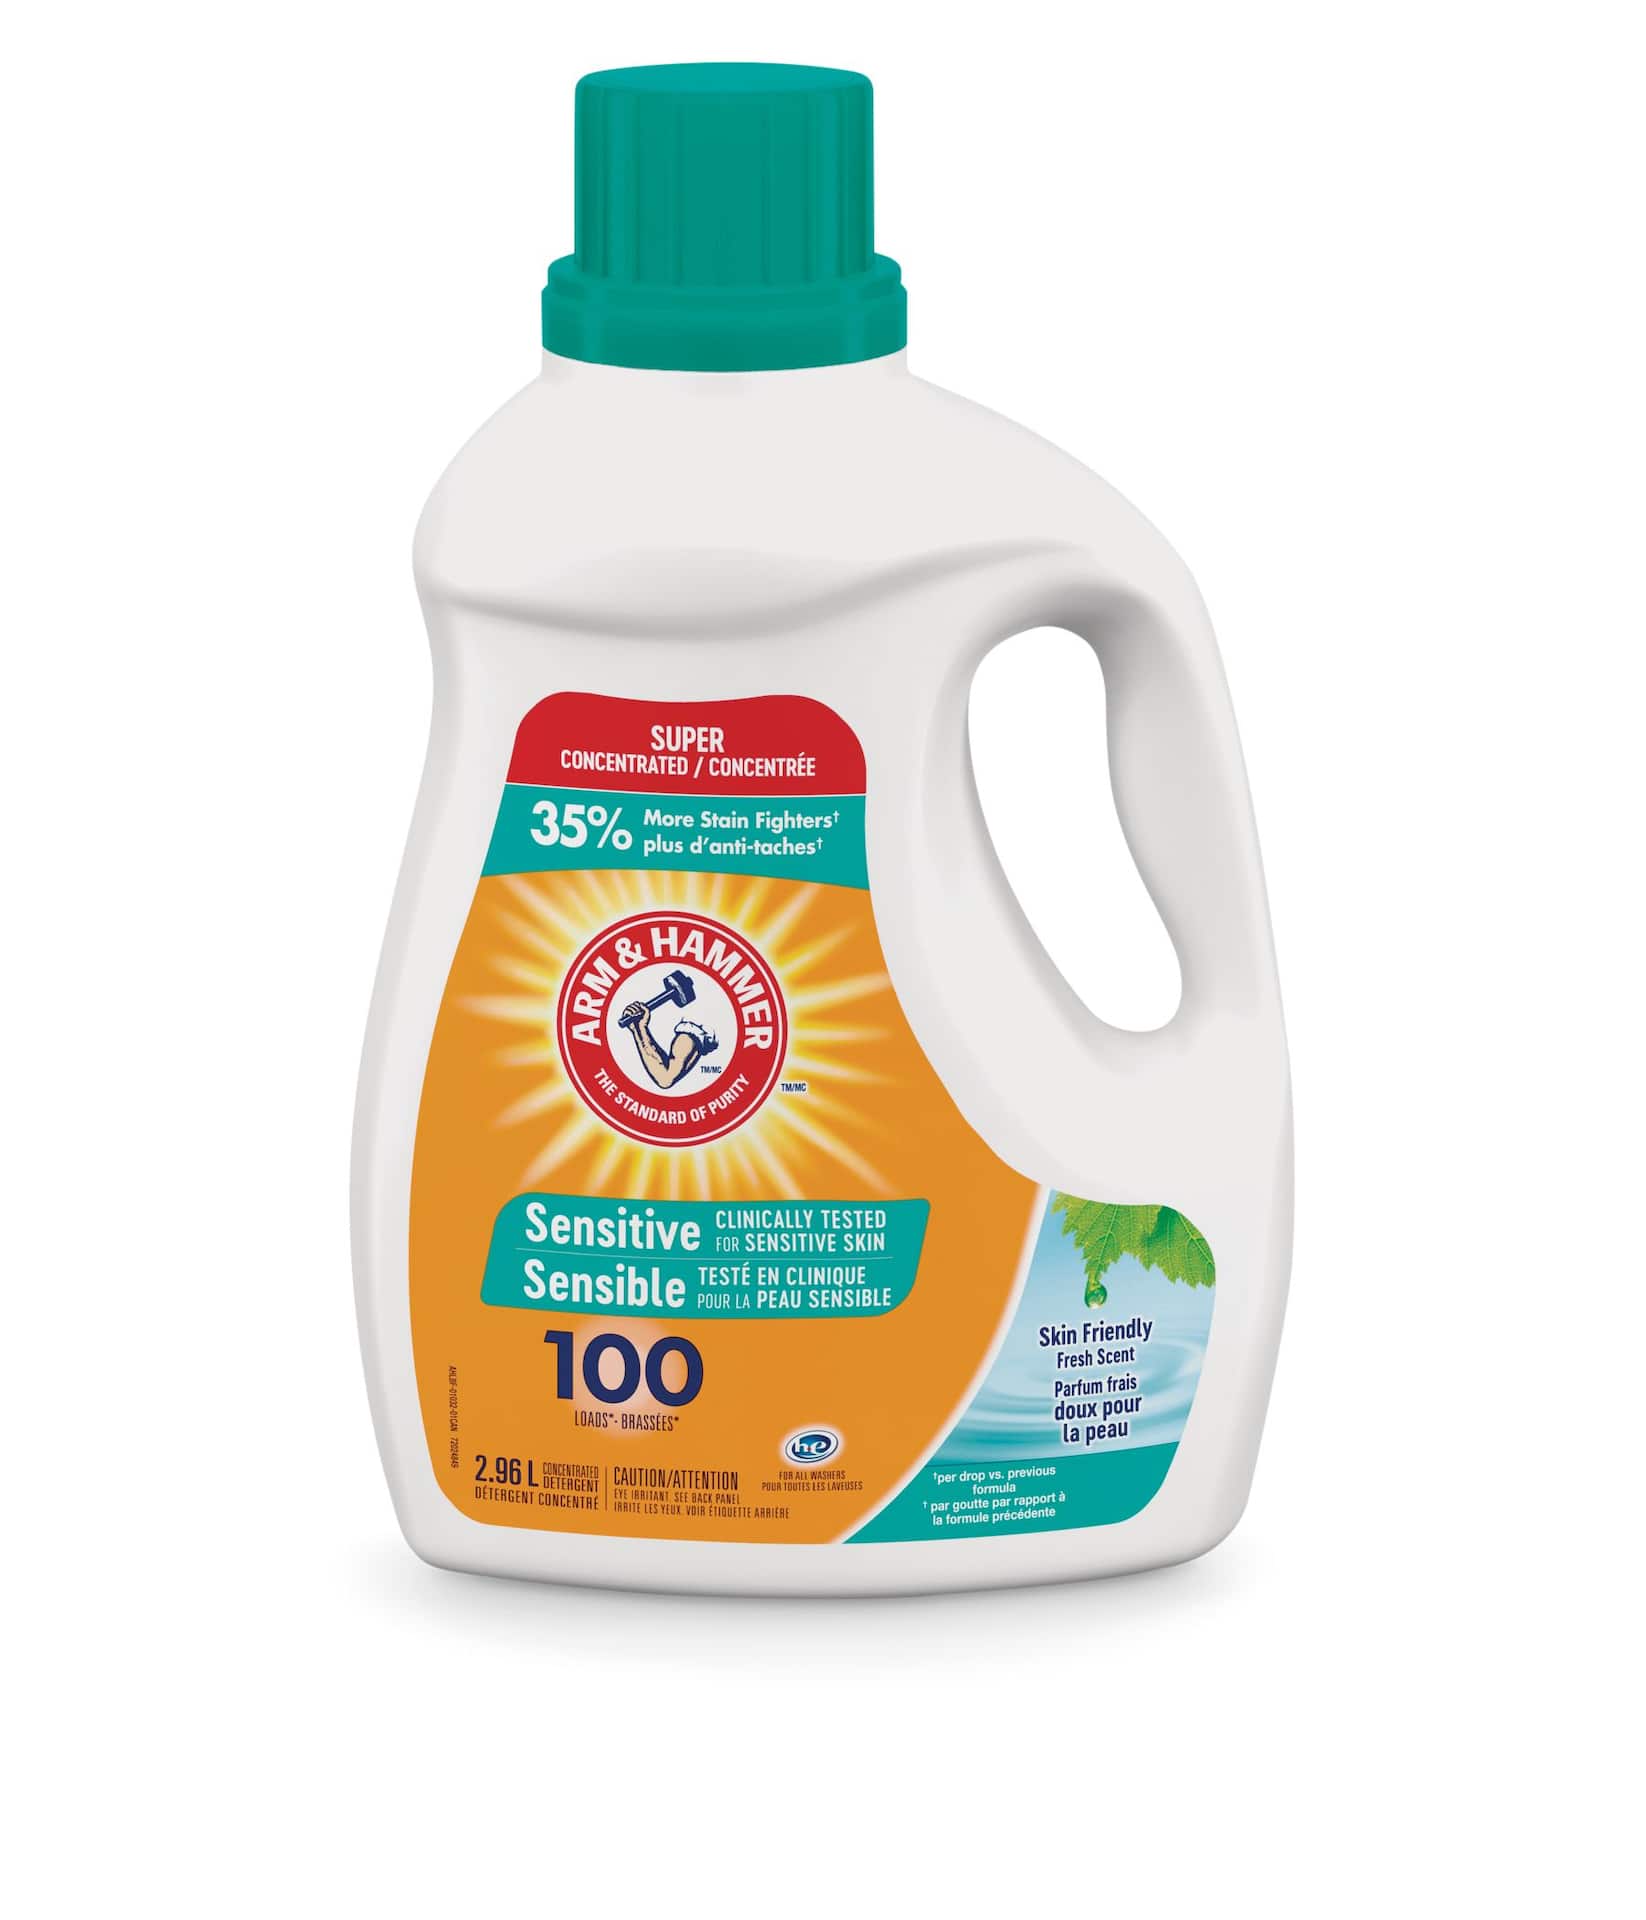 laundry detergent for underwear, laundry detergent for underwear Suppliers  and Manufacturers at